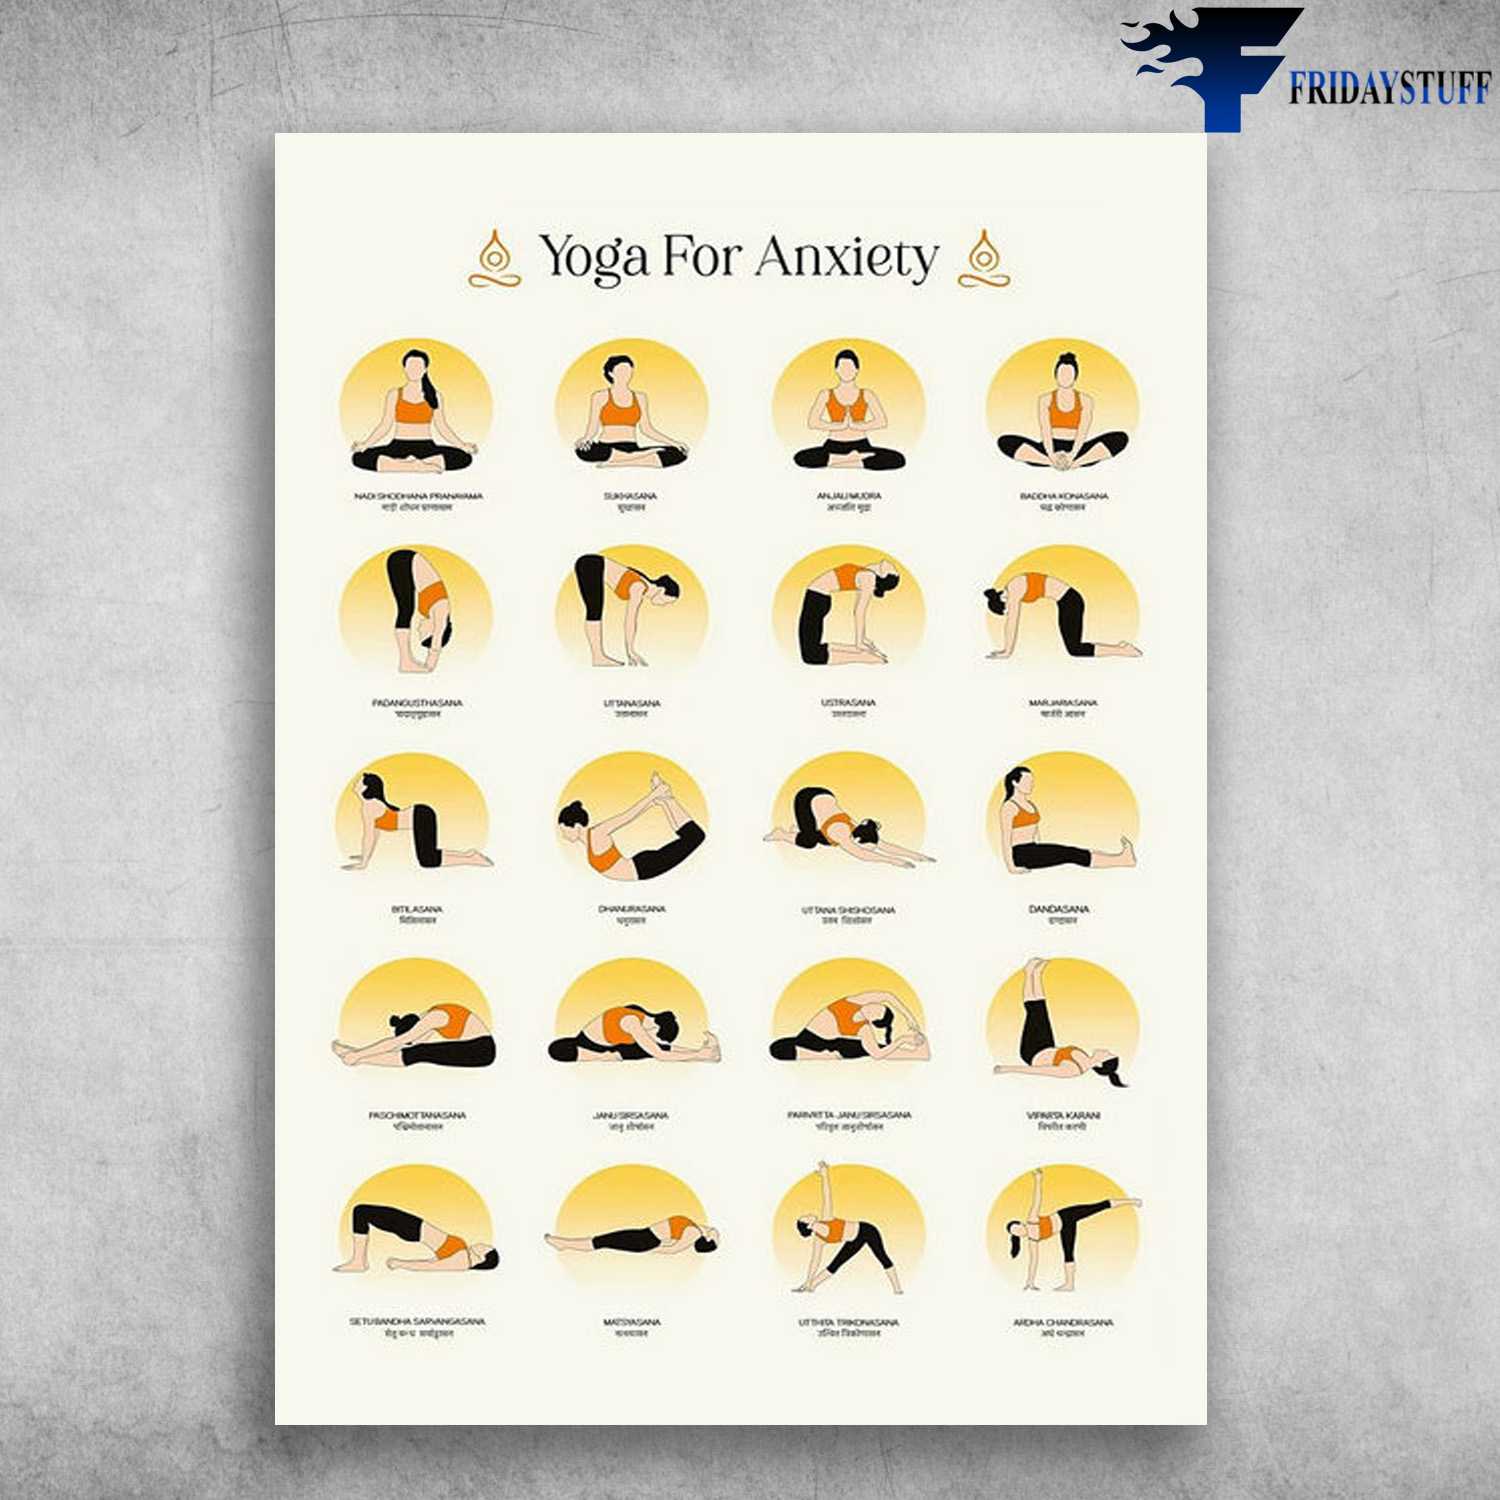 Yoda For Anxiety - Yoga Poses